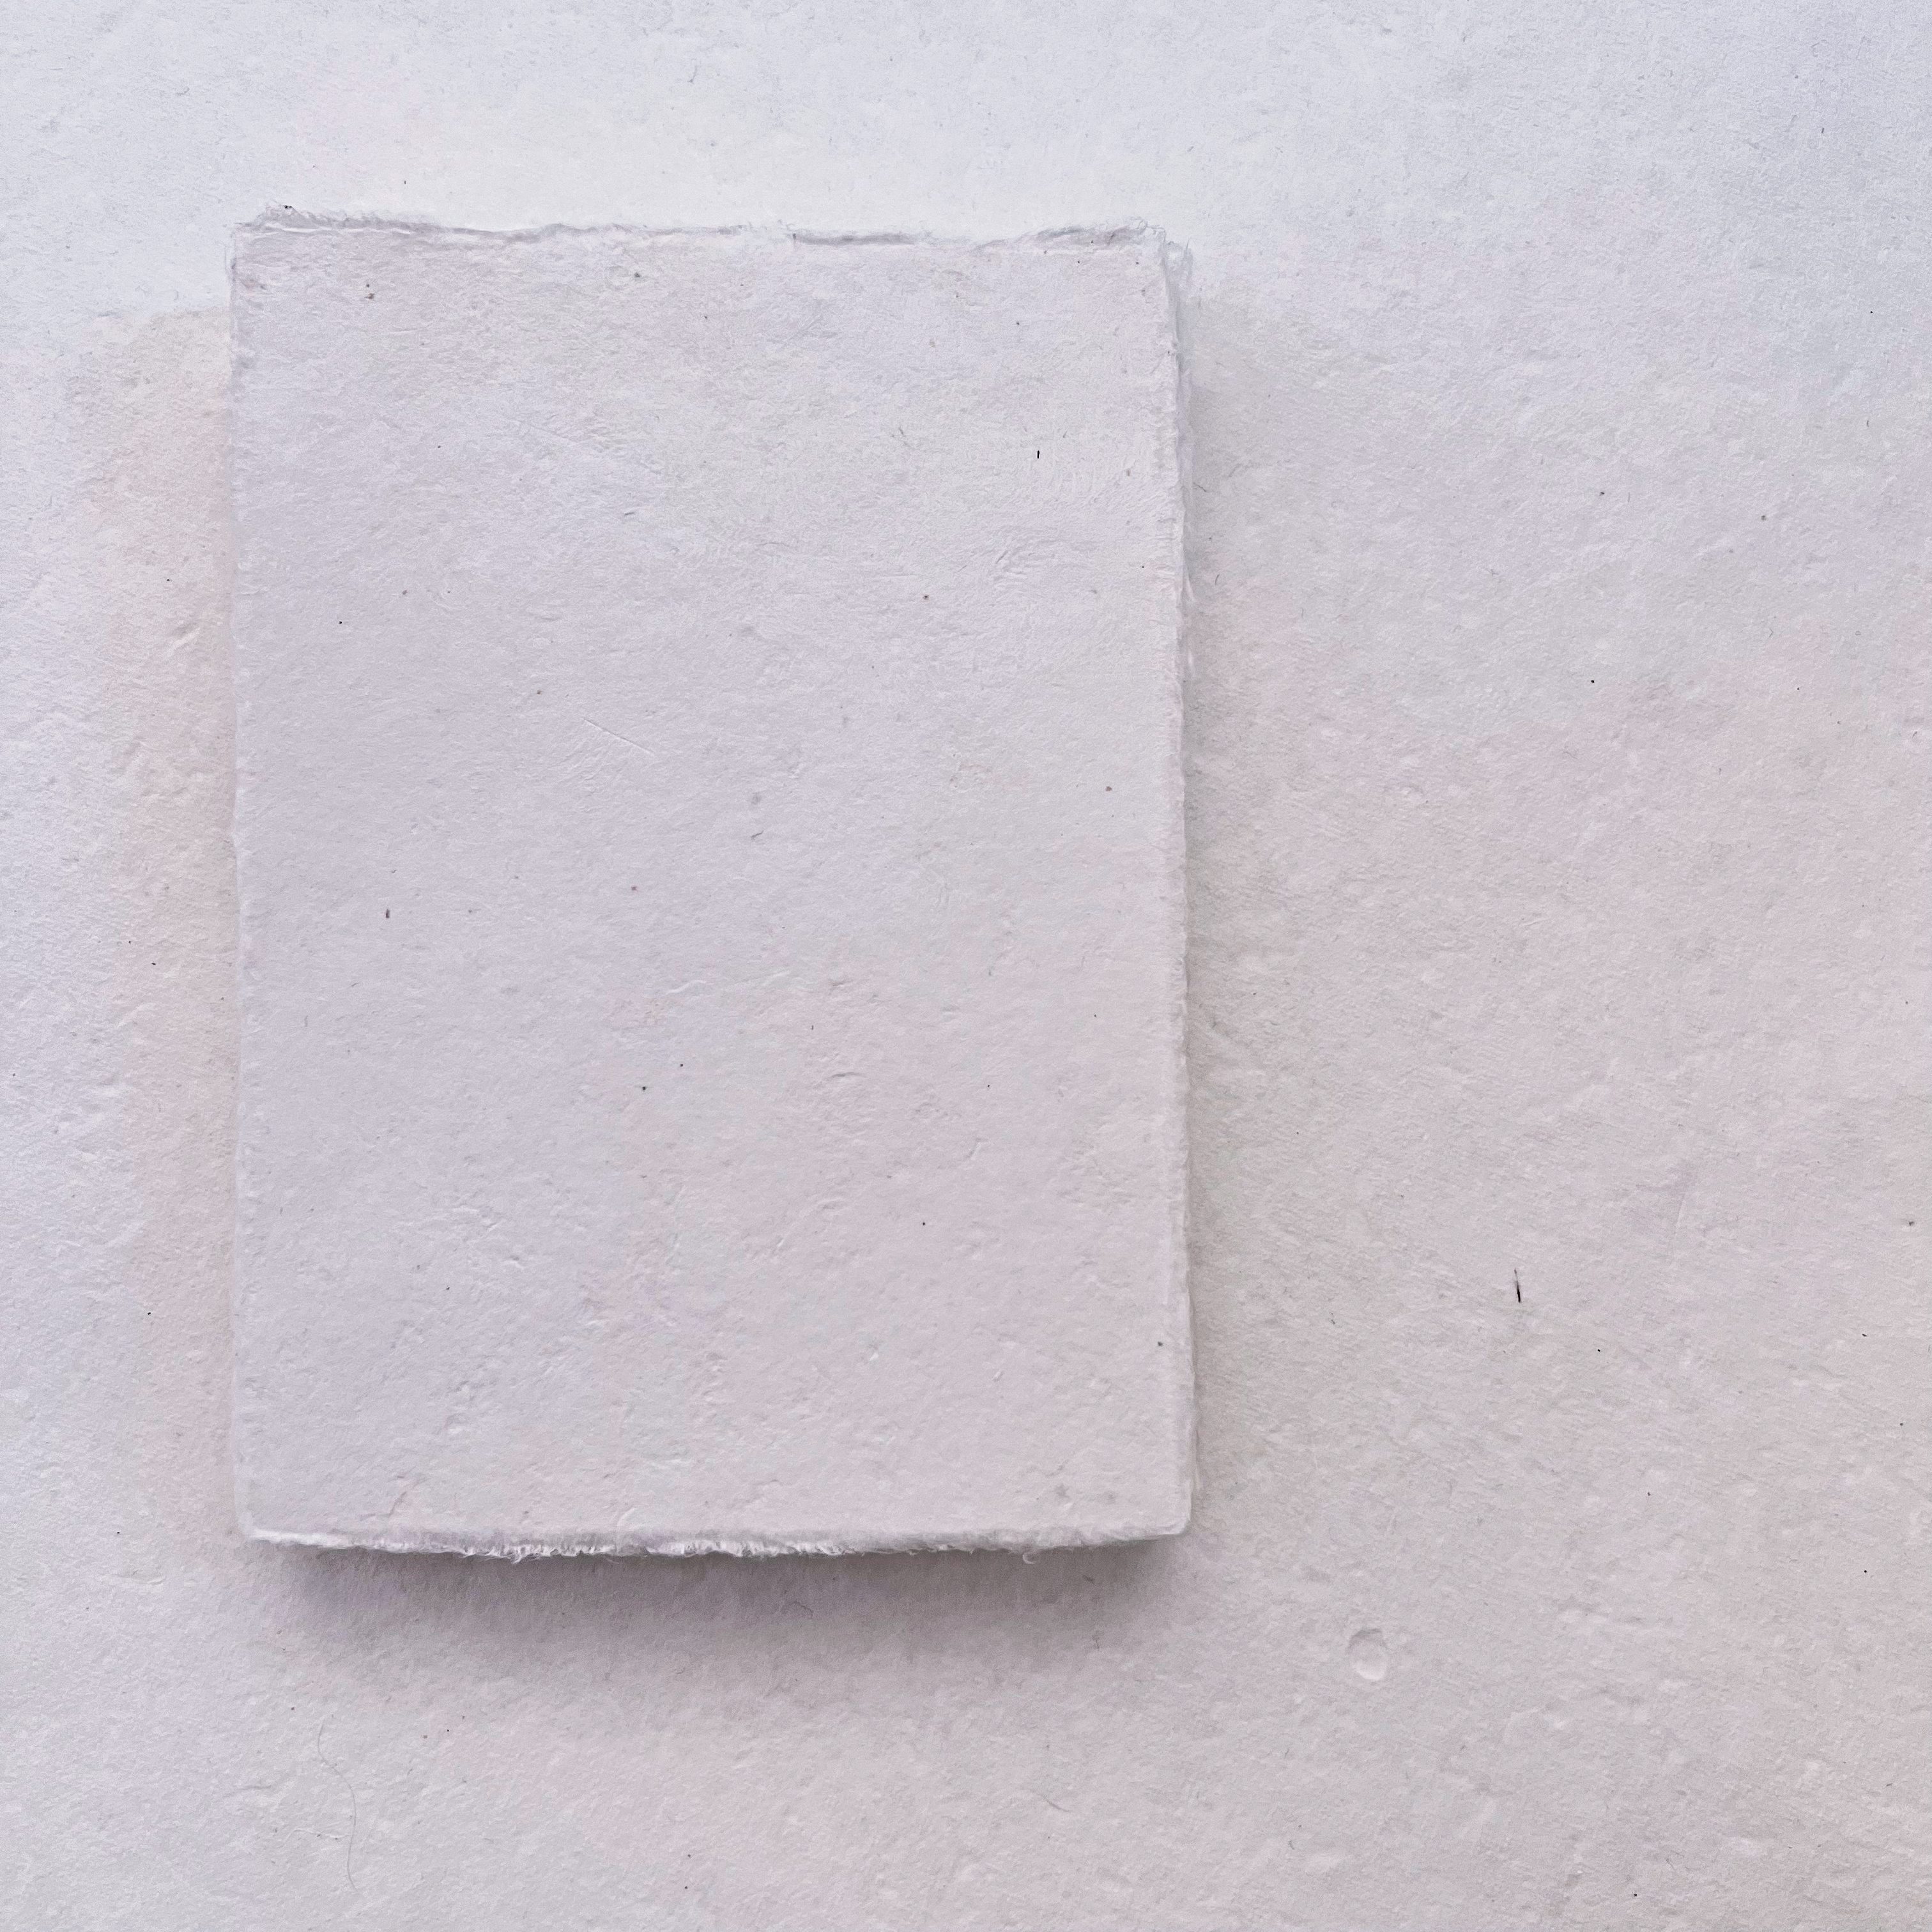 Card, Mulberry paper,White, smooth 21x15cm 200gsm, tear edge